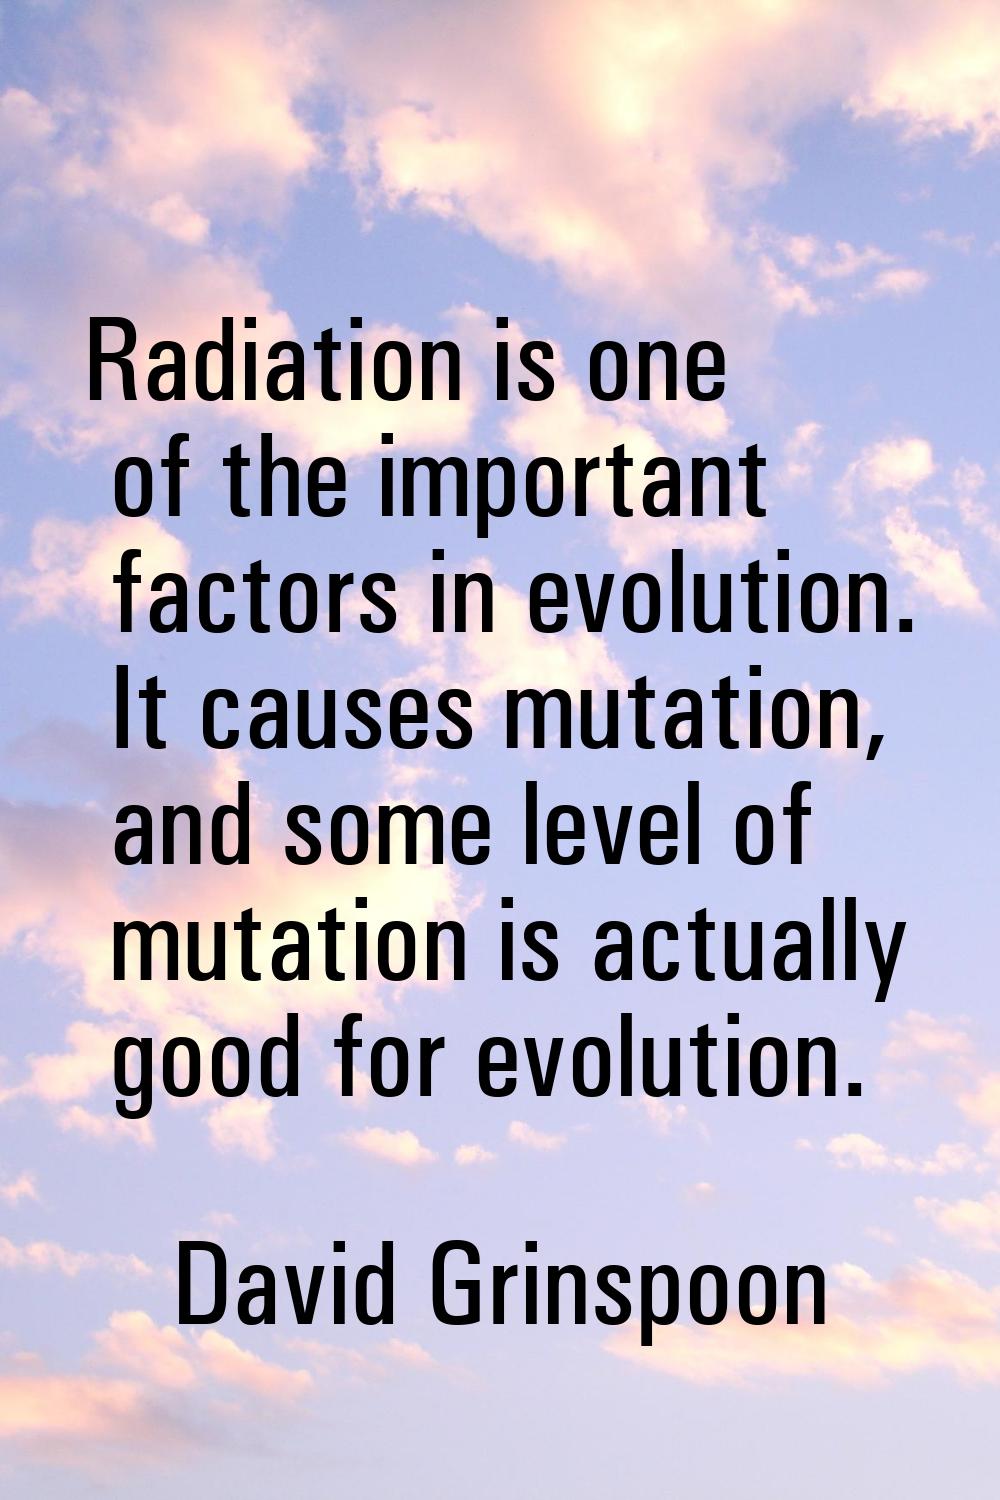 Radiation is one of the important factors in evolution. It causes mutation, and some level of mutat